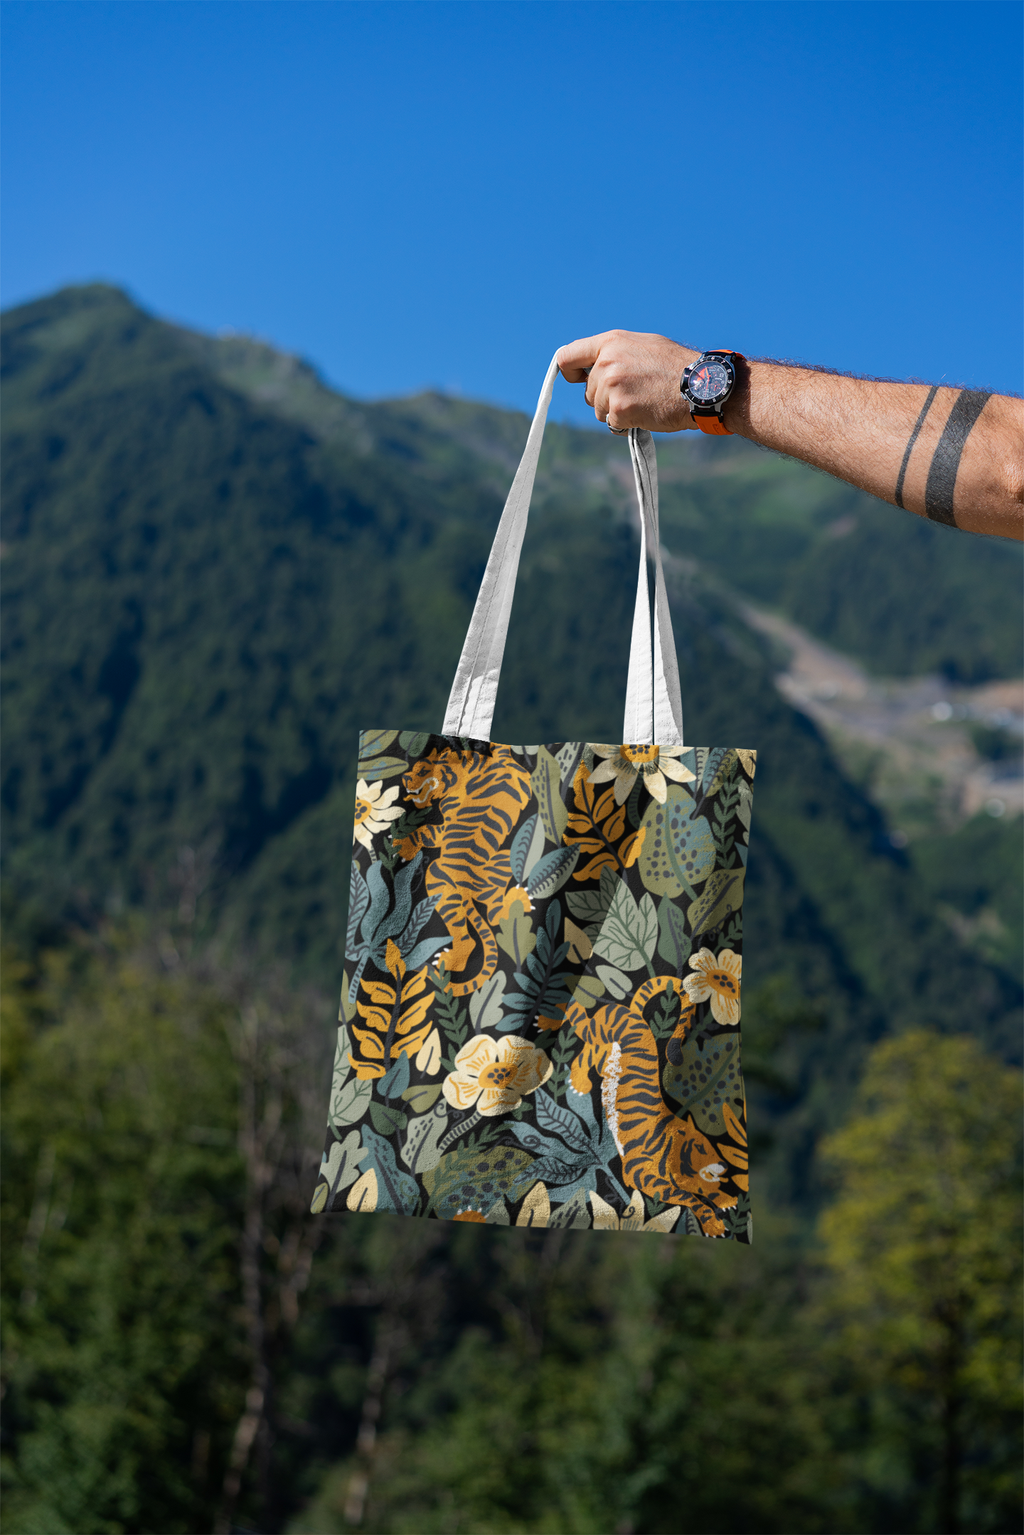 mockup-featuring-a-man-s-hand-holding-a-tote-bag-against-a-natural-scenery-3131-el1 (3).png